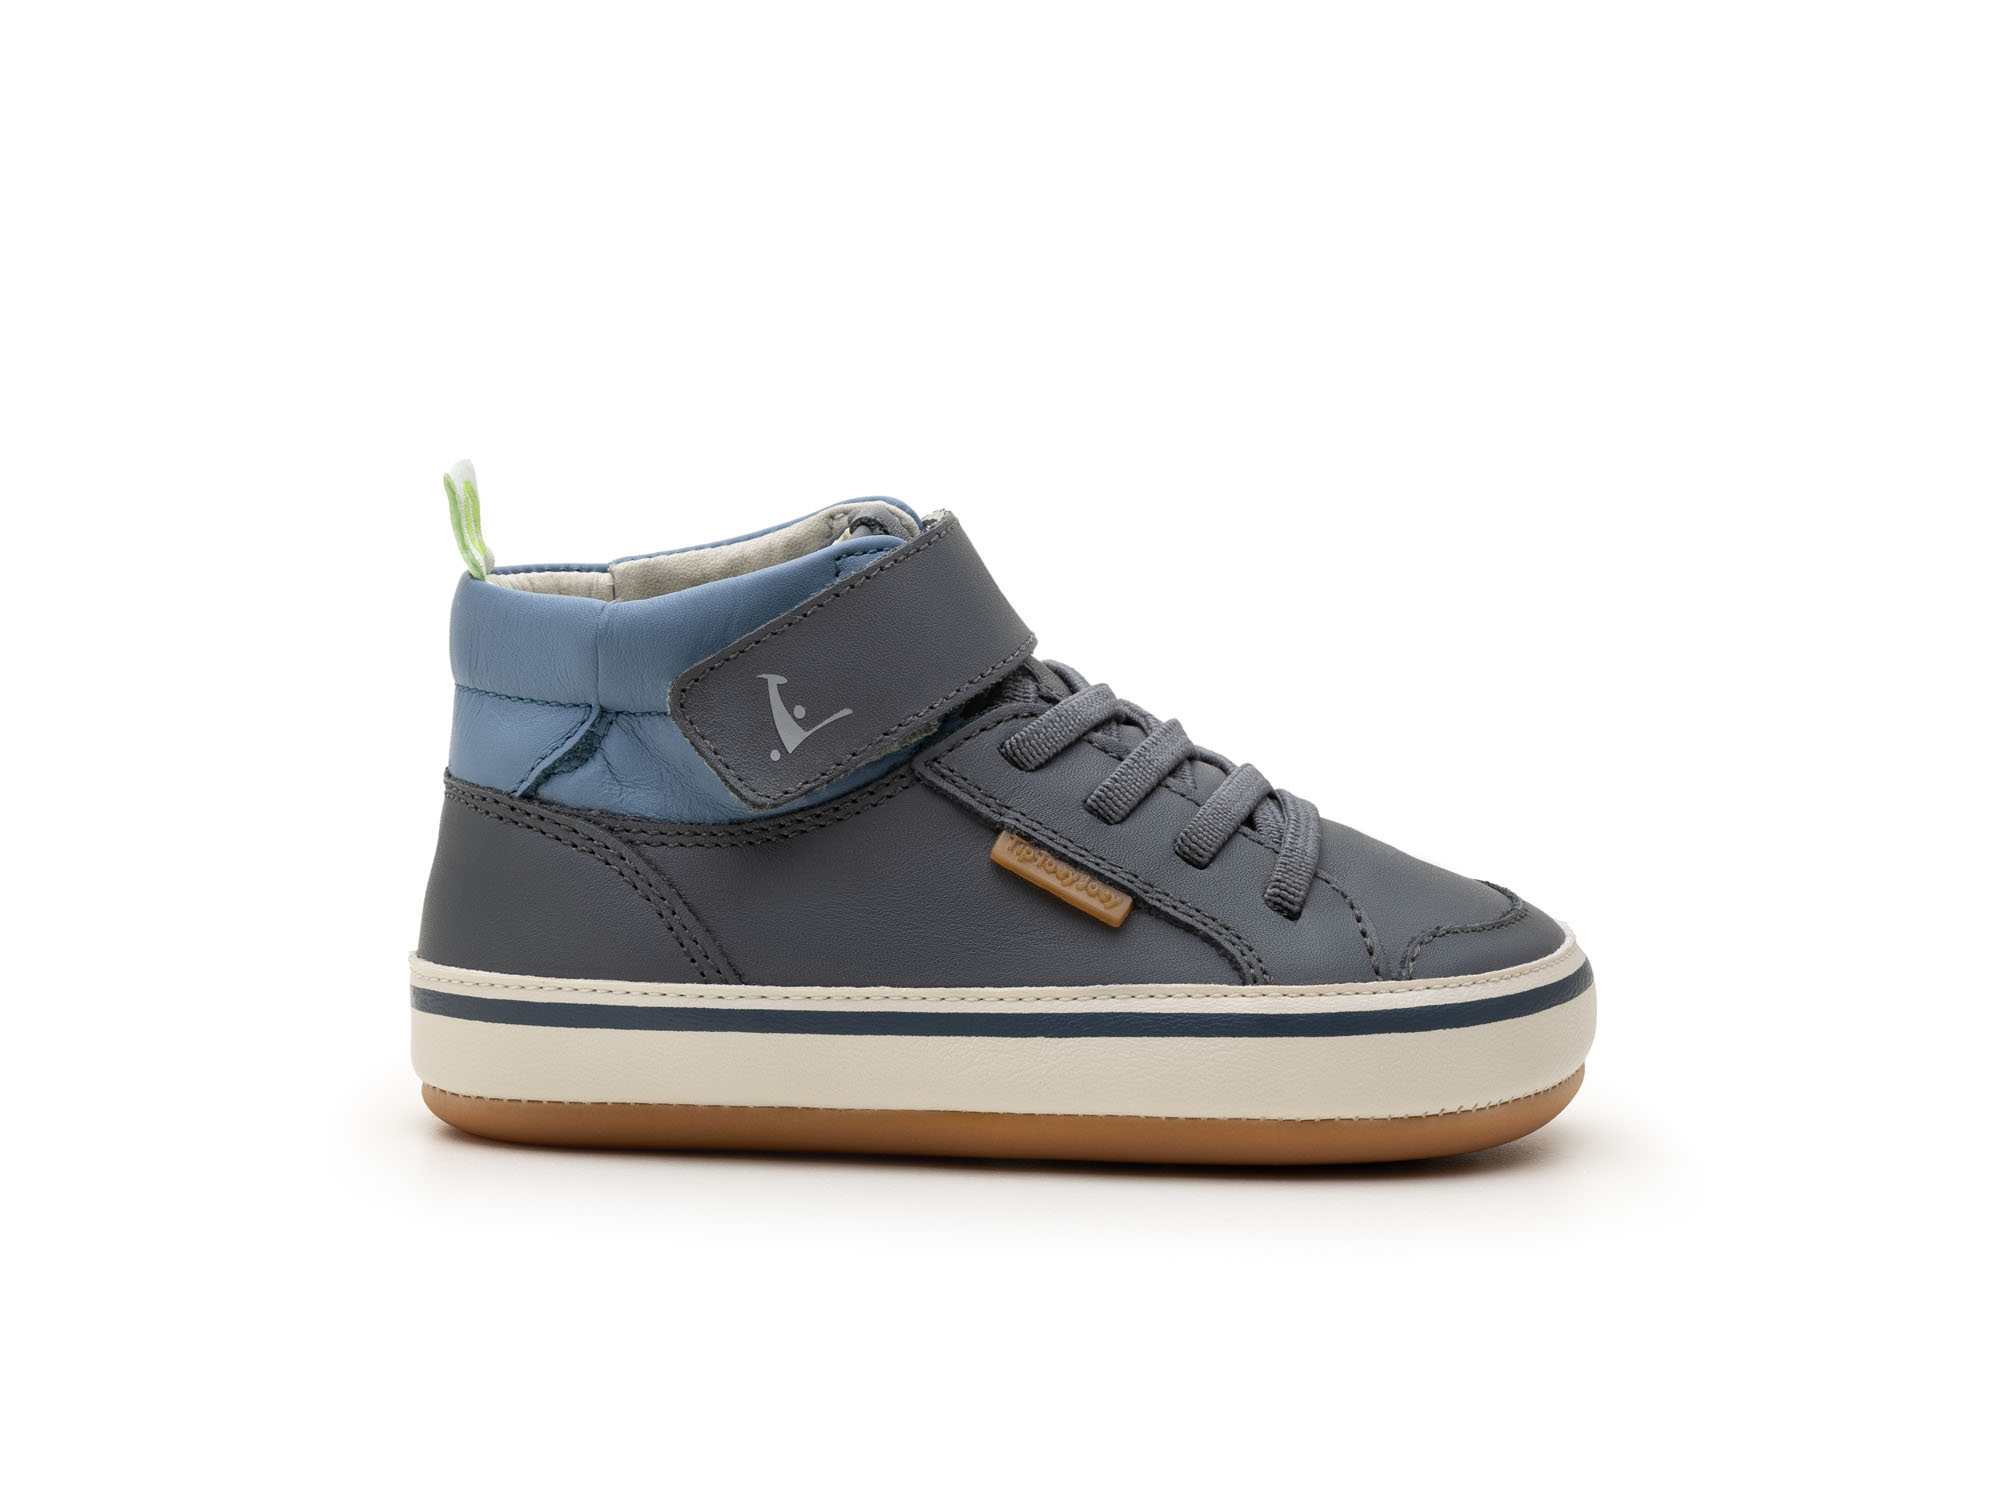 UP & GO Sneakers for Boys Alley | Tip Toey Joey - Australia - 4